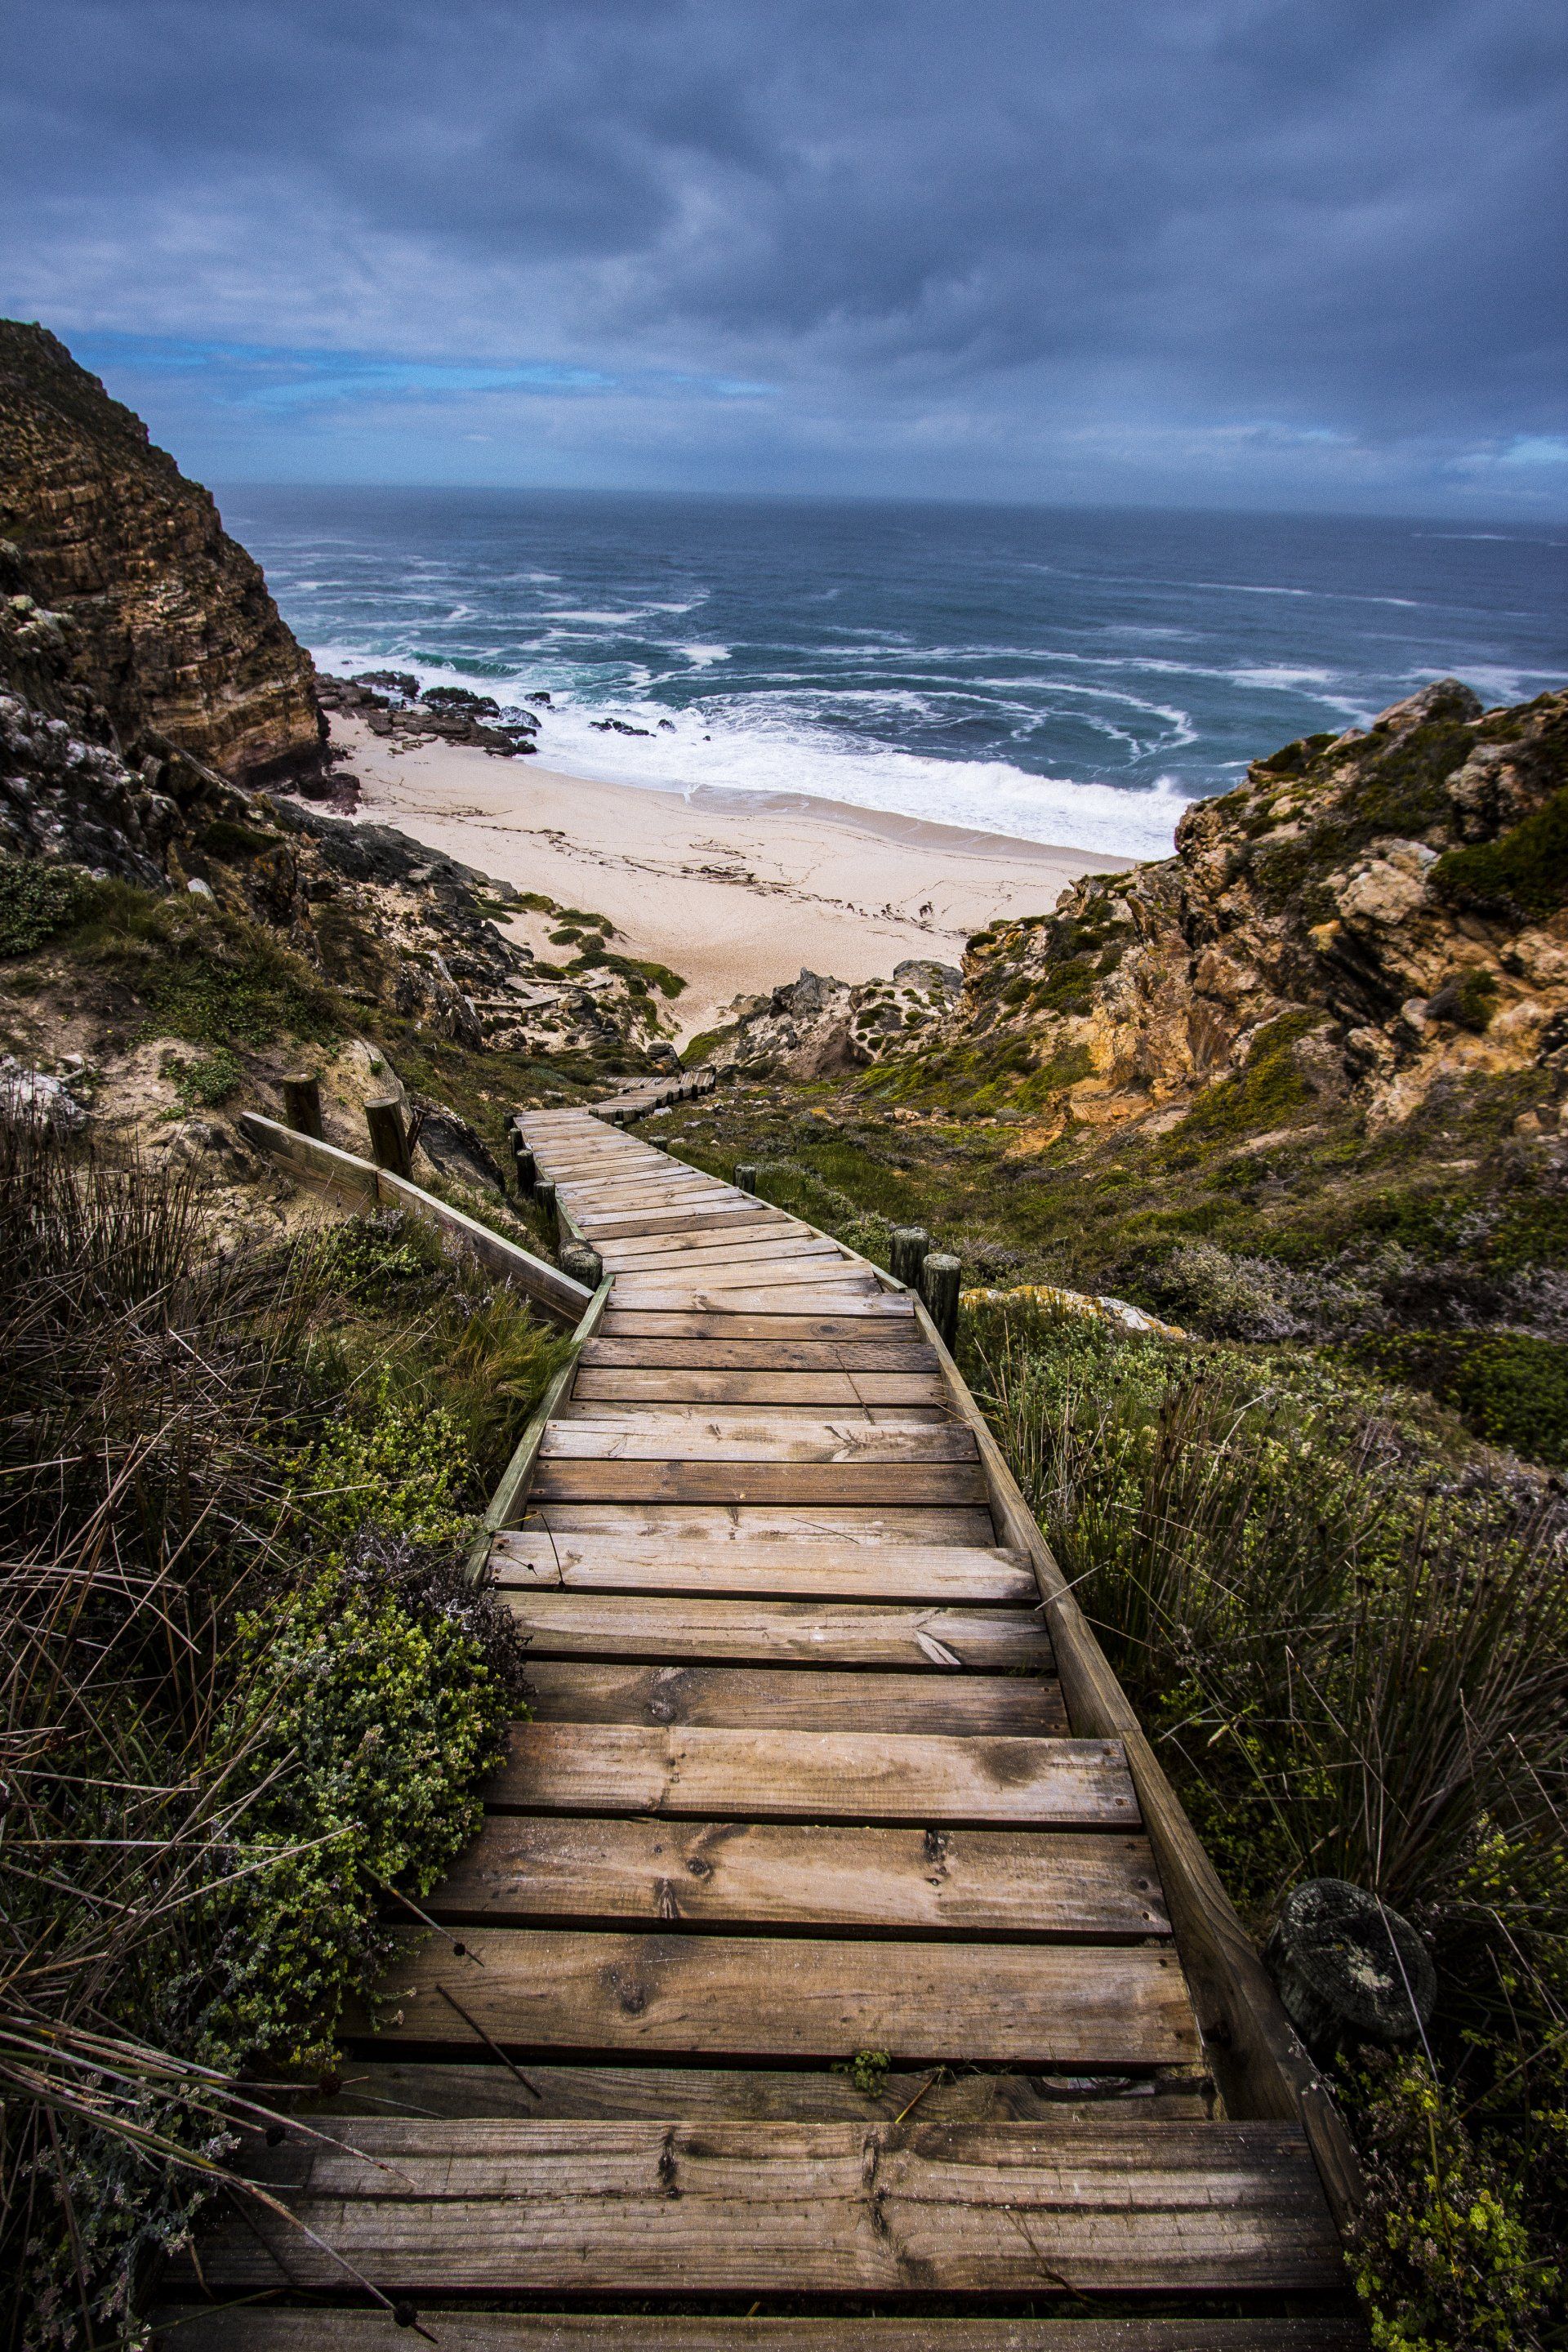 A wooden walkway leading to a beach on a cloudy day.